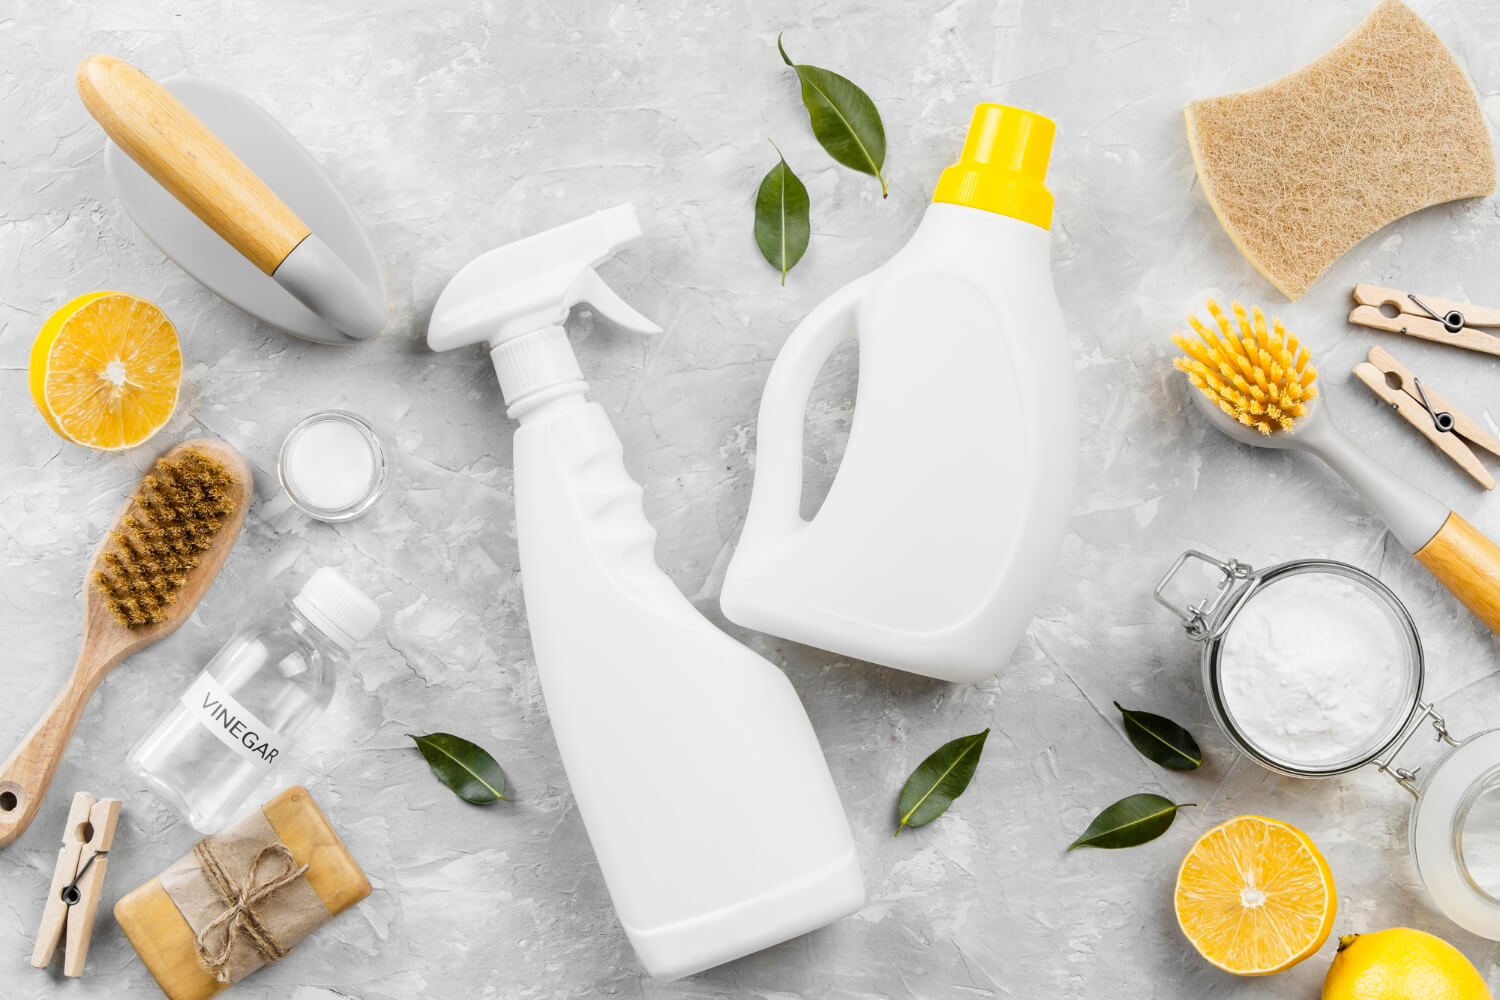 Organic Cleaning Products